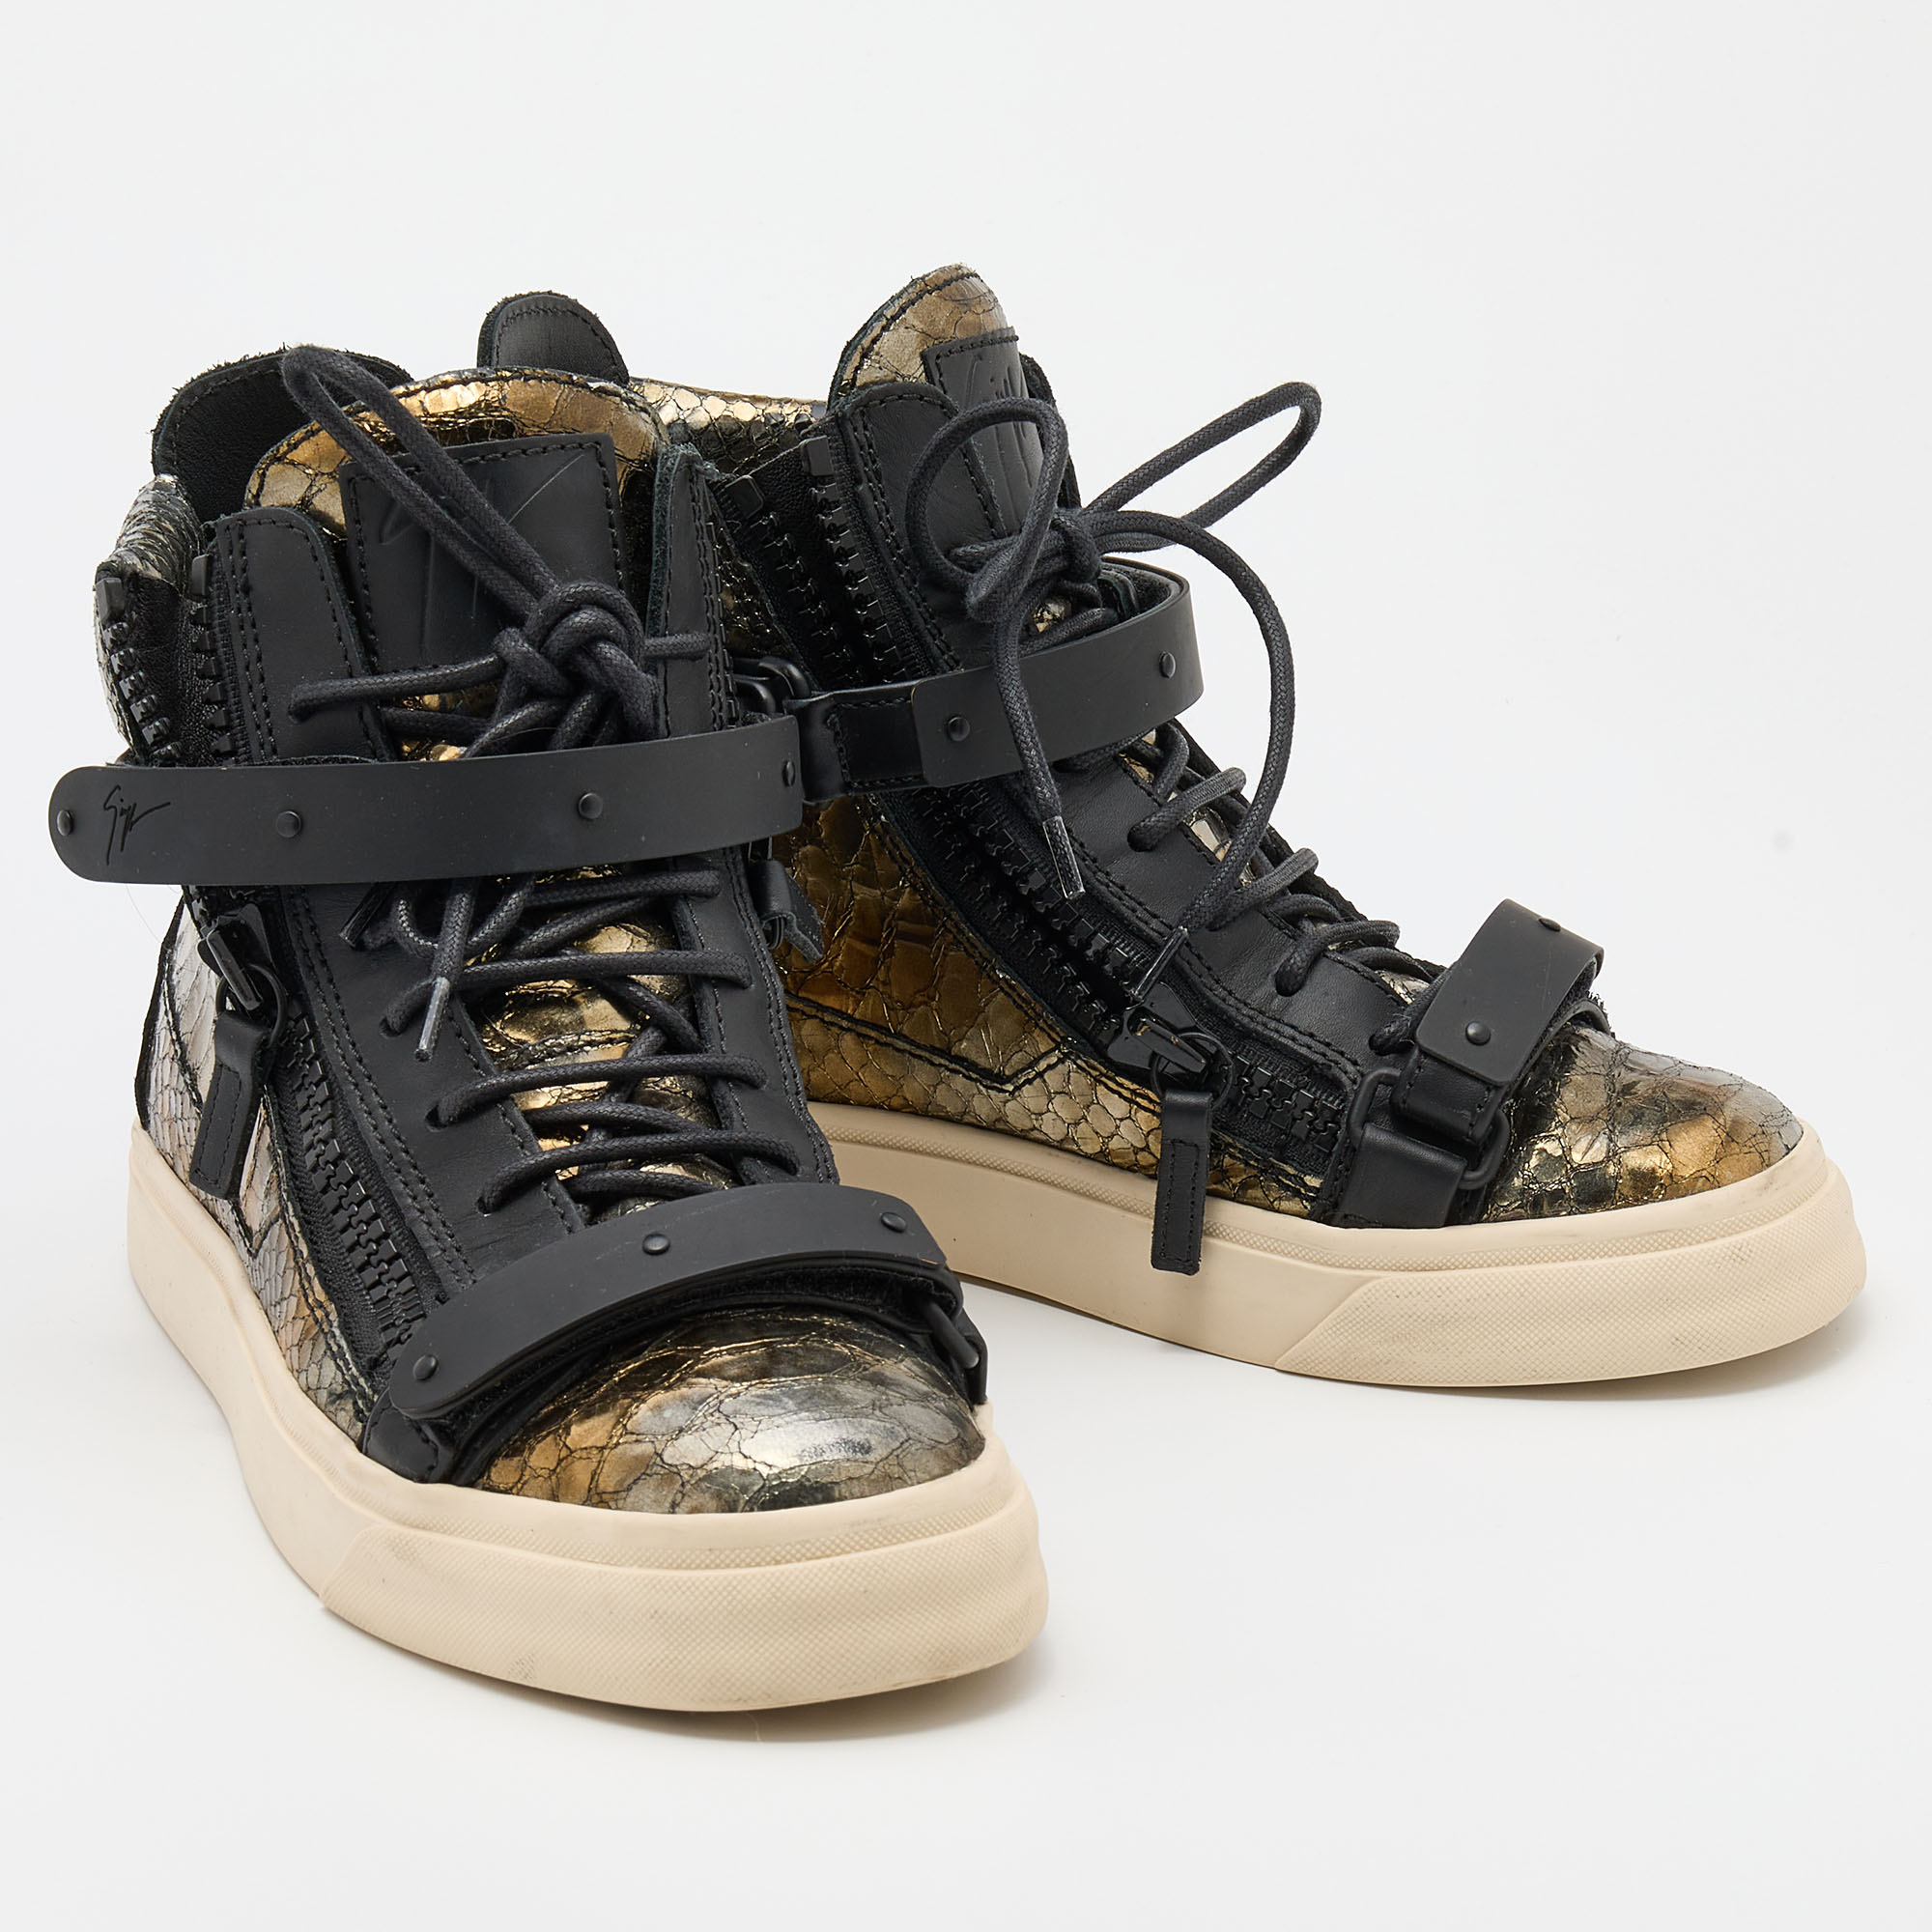 Giuseppe Zanotti Gold/Black Python Embossed Leather Coby High Top Sneakers Size 37